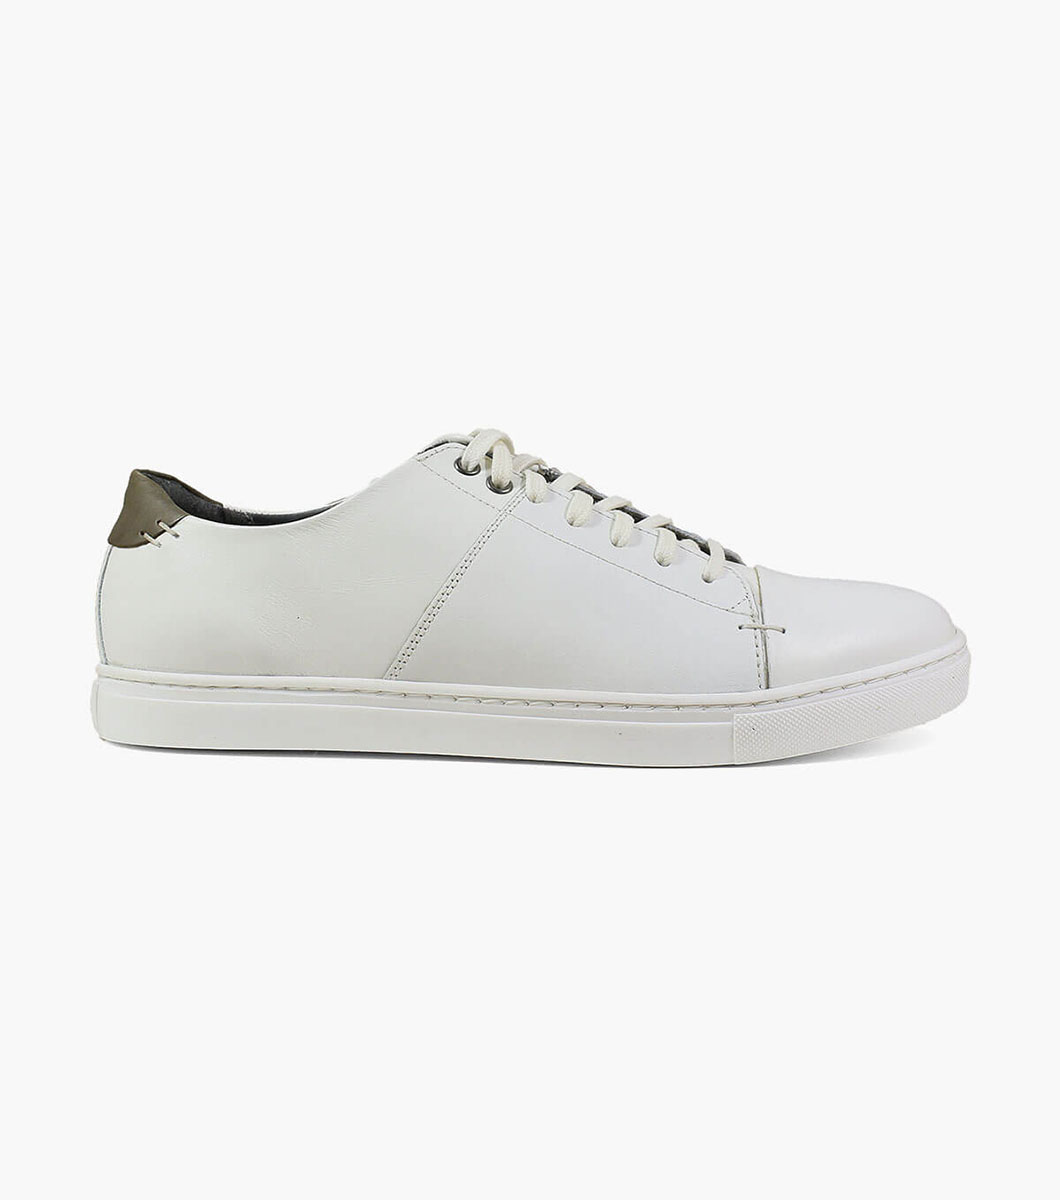 Men’s Casual Shoes | White Lace Up Oxford | Florsheim Watts